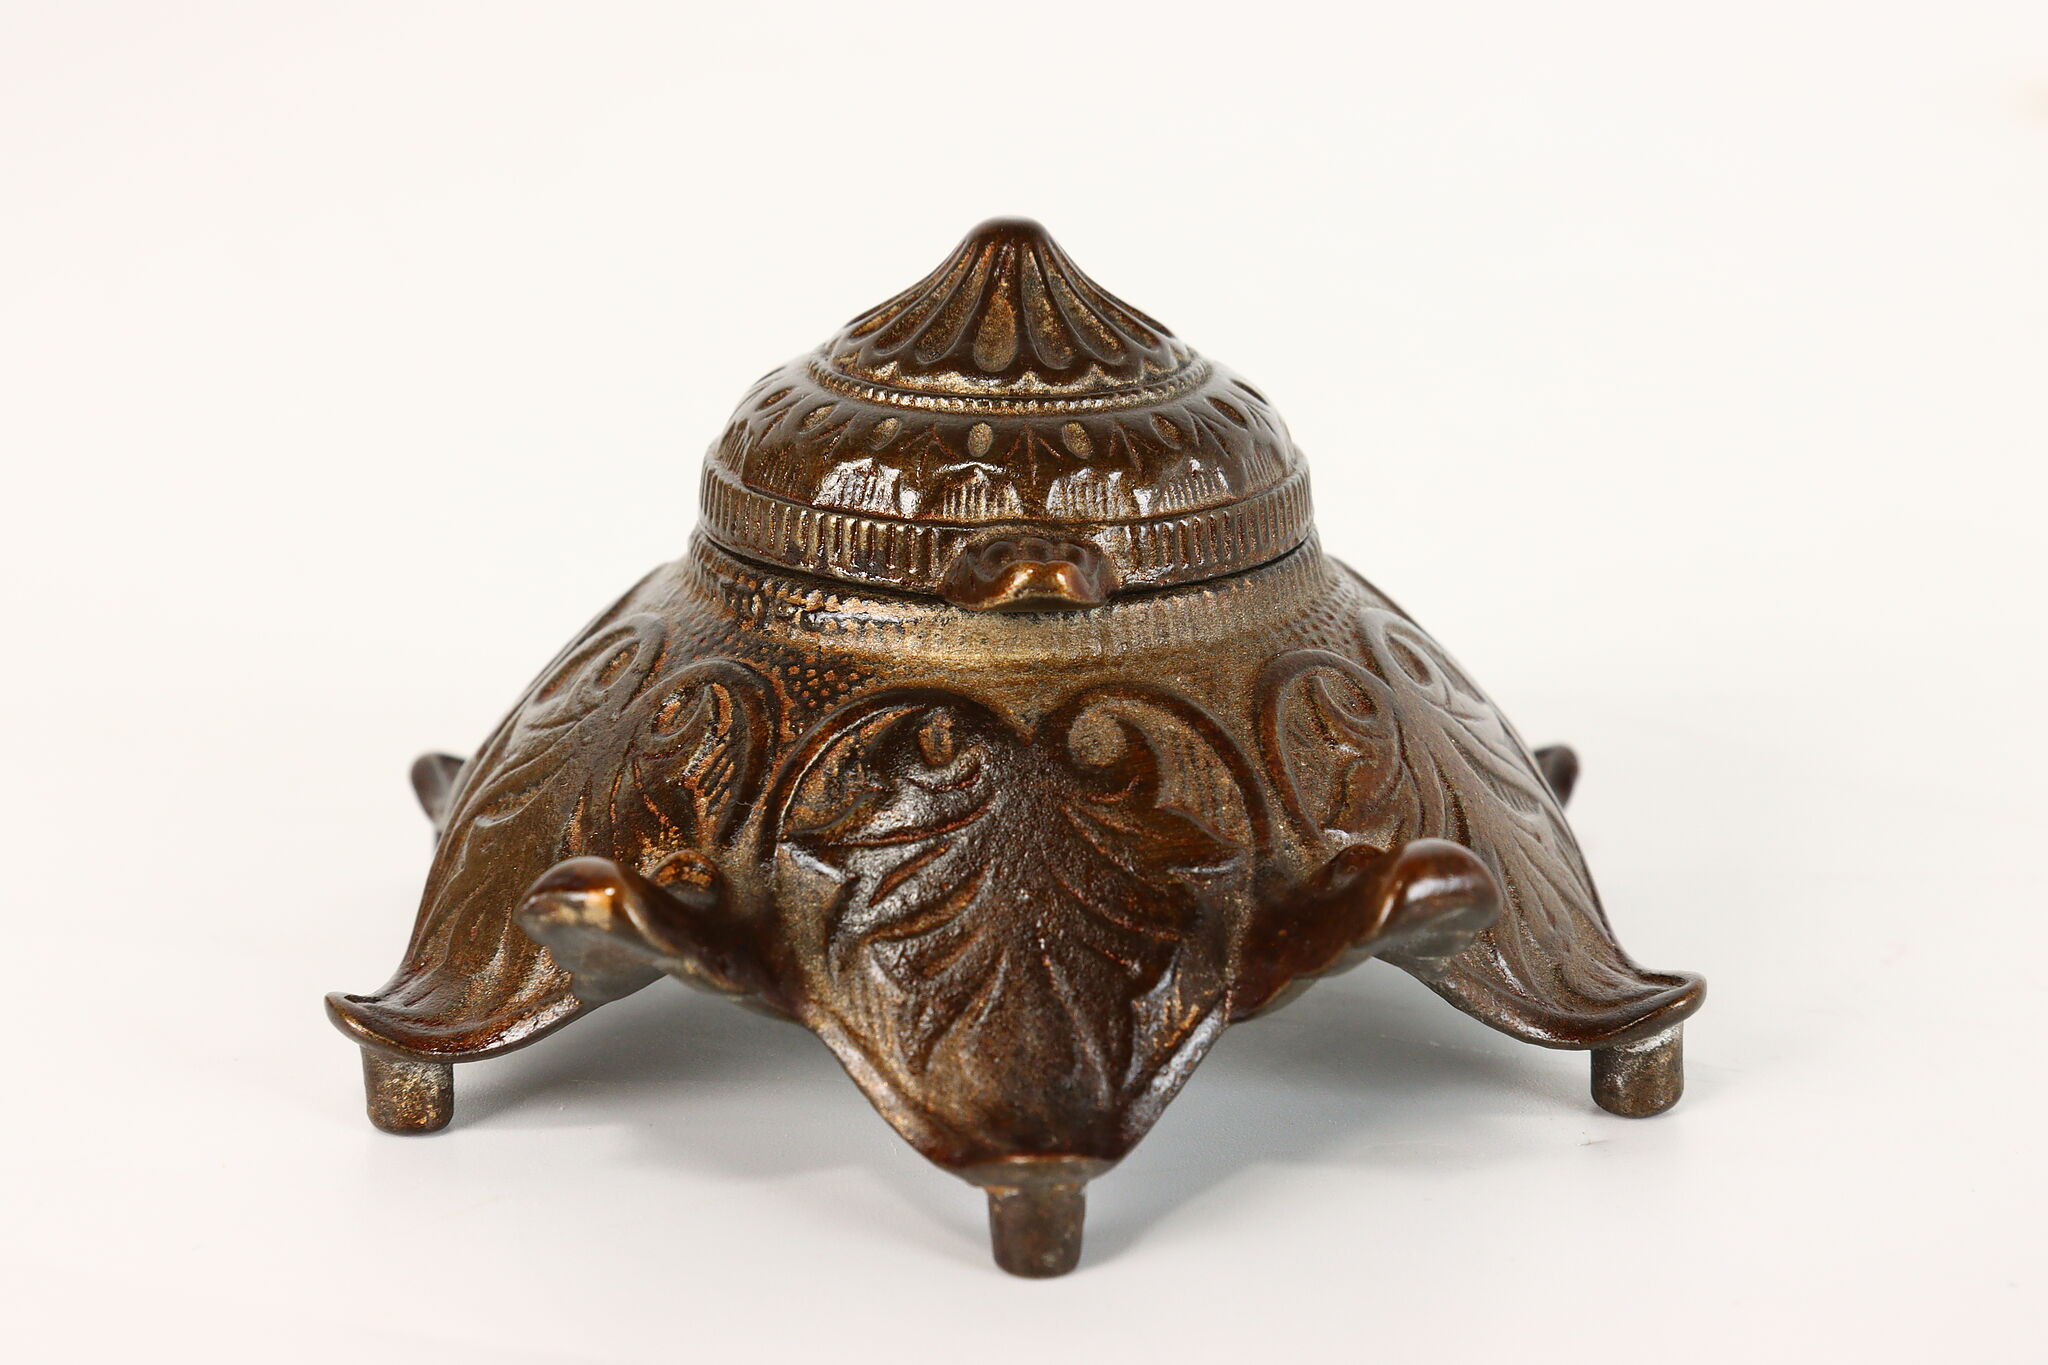 Antique Pen Tray with Inkwell from WMF, 1890s for sale at Pamono